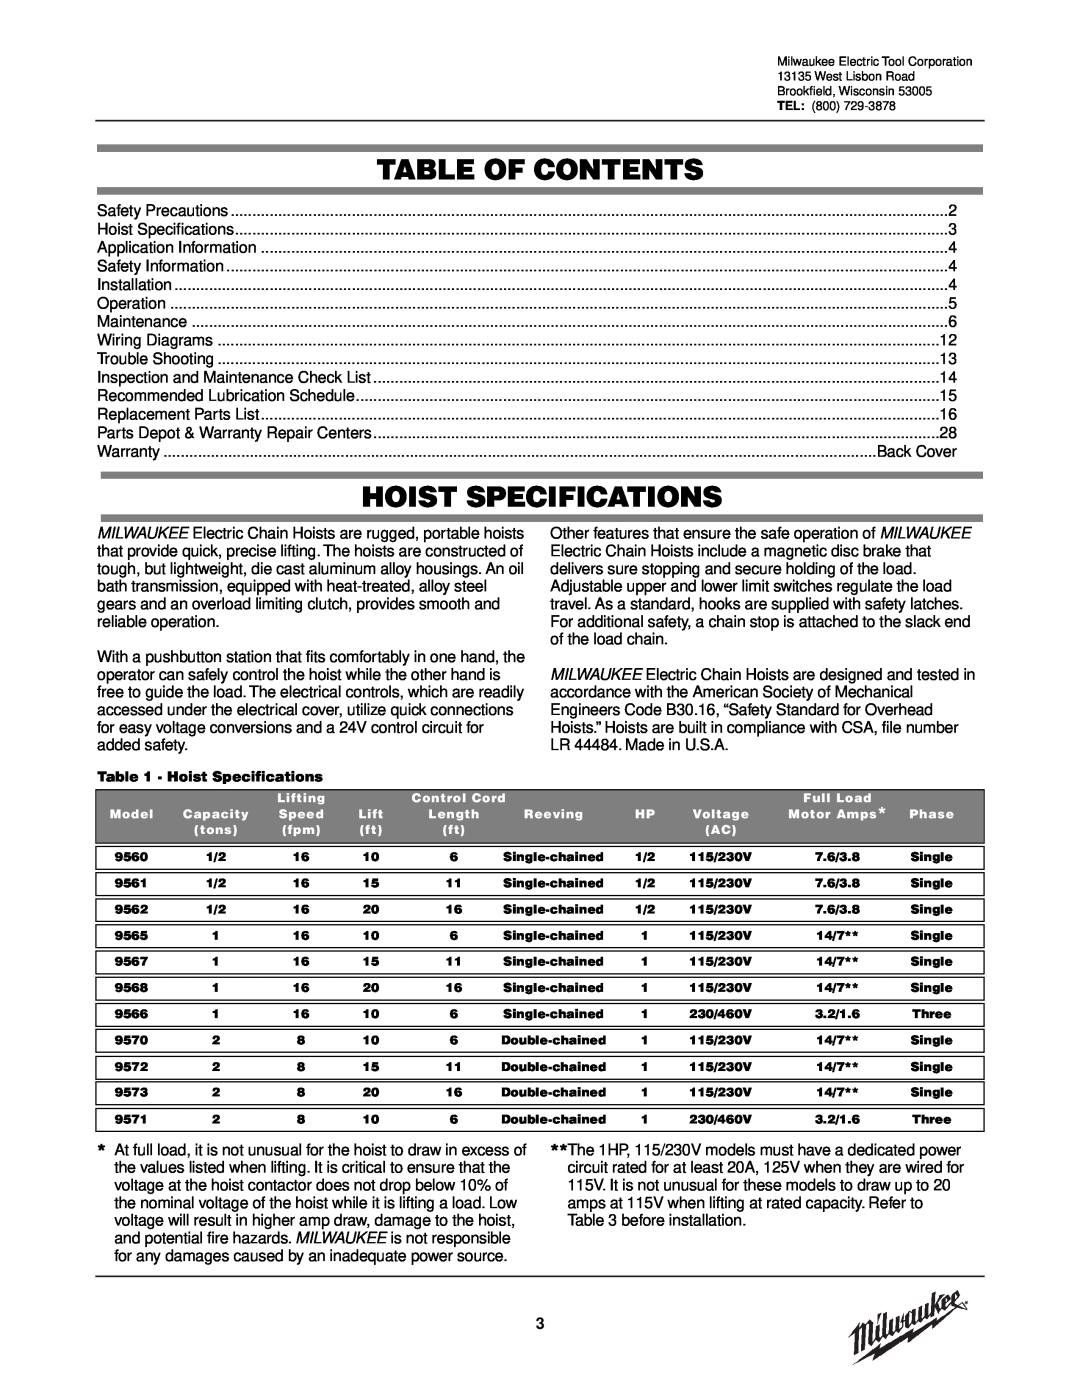 Milwaukee 9570, 9572, 9573, 9571, 9568, 9565, 9560, 9561, 9567, 9566, 9562 manual Table Of Contents, Hoist Specifications 